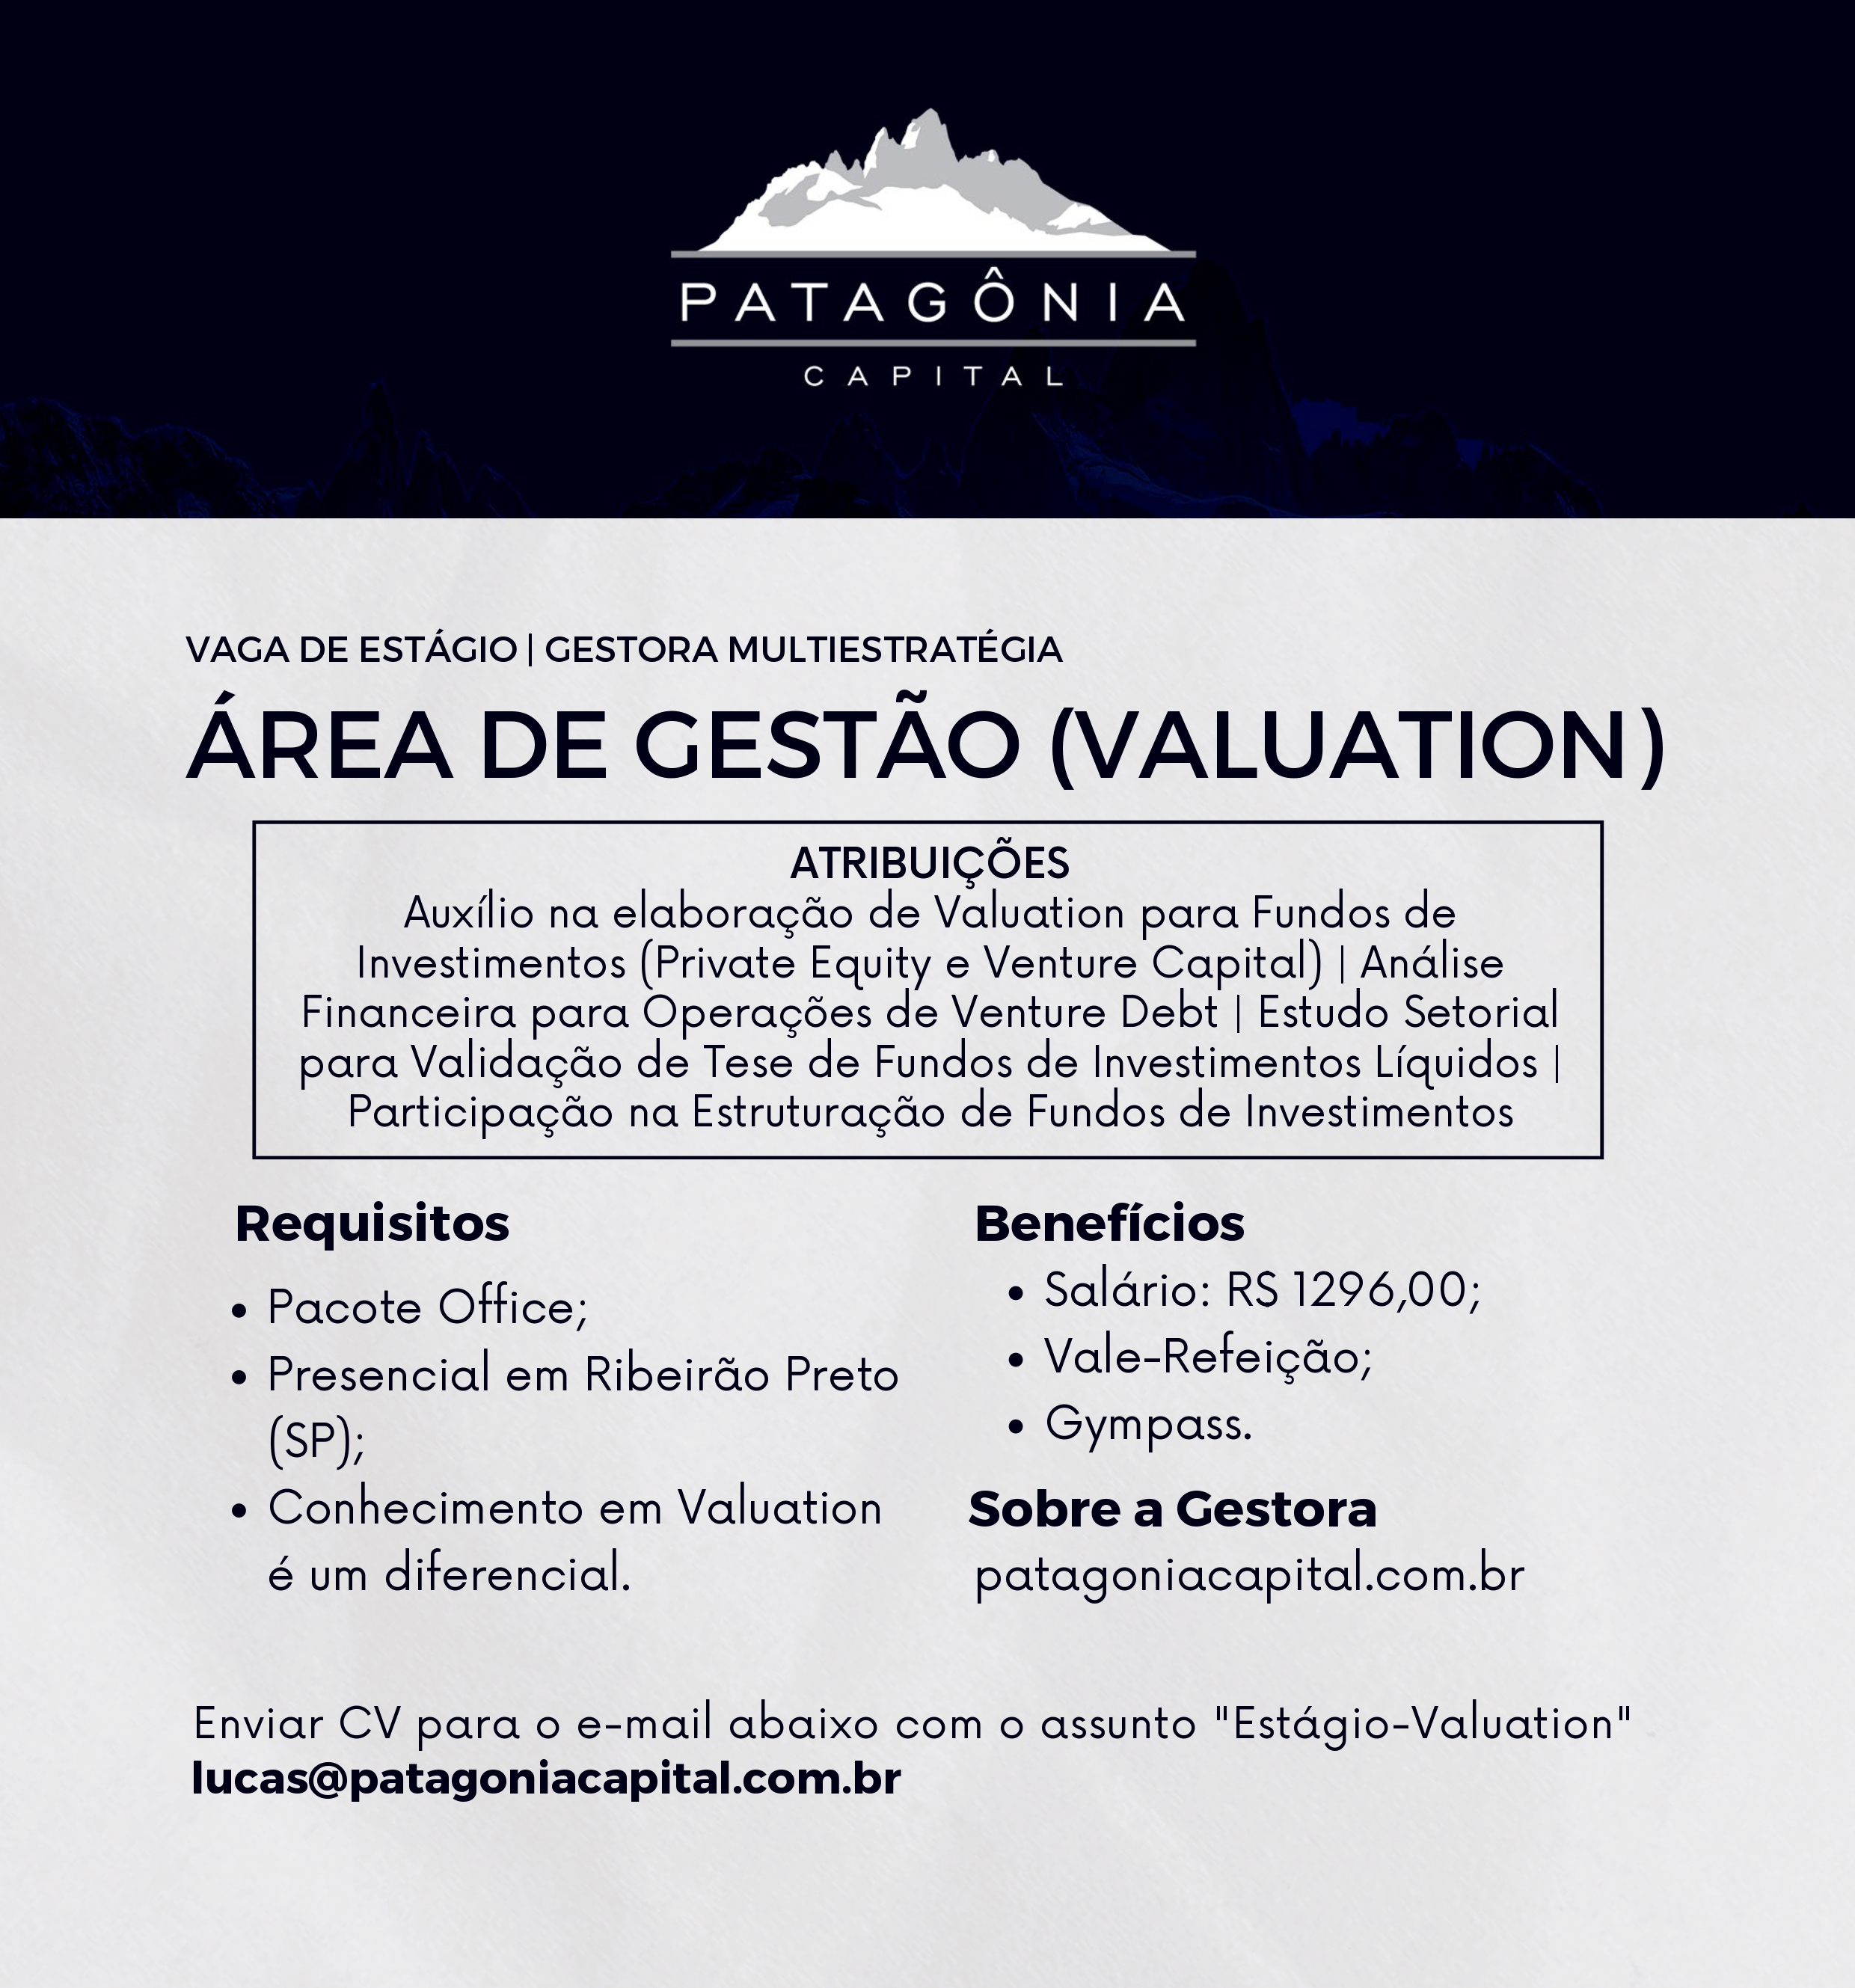 Patagonia_Capital_Valuation_page-0001.jpg